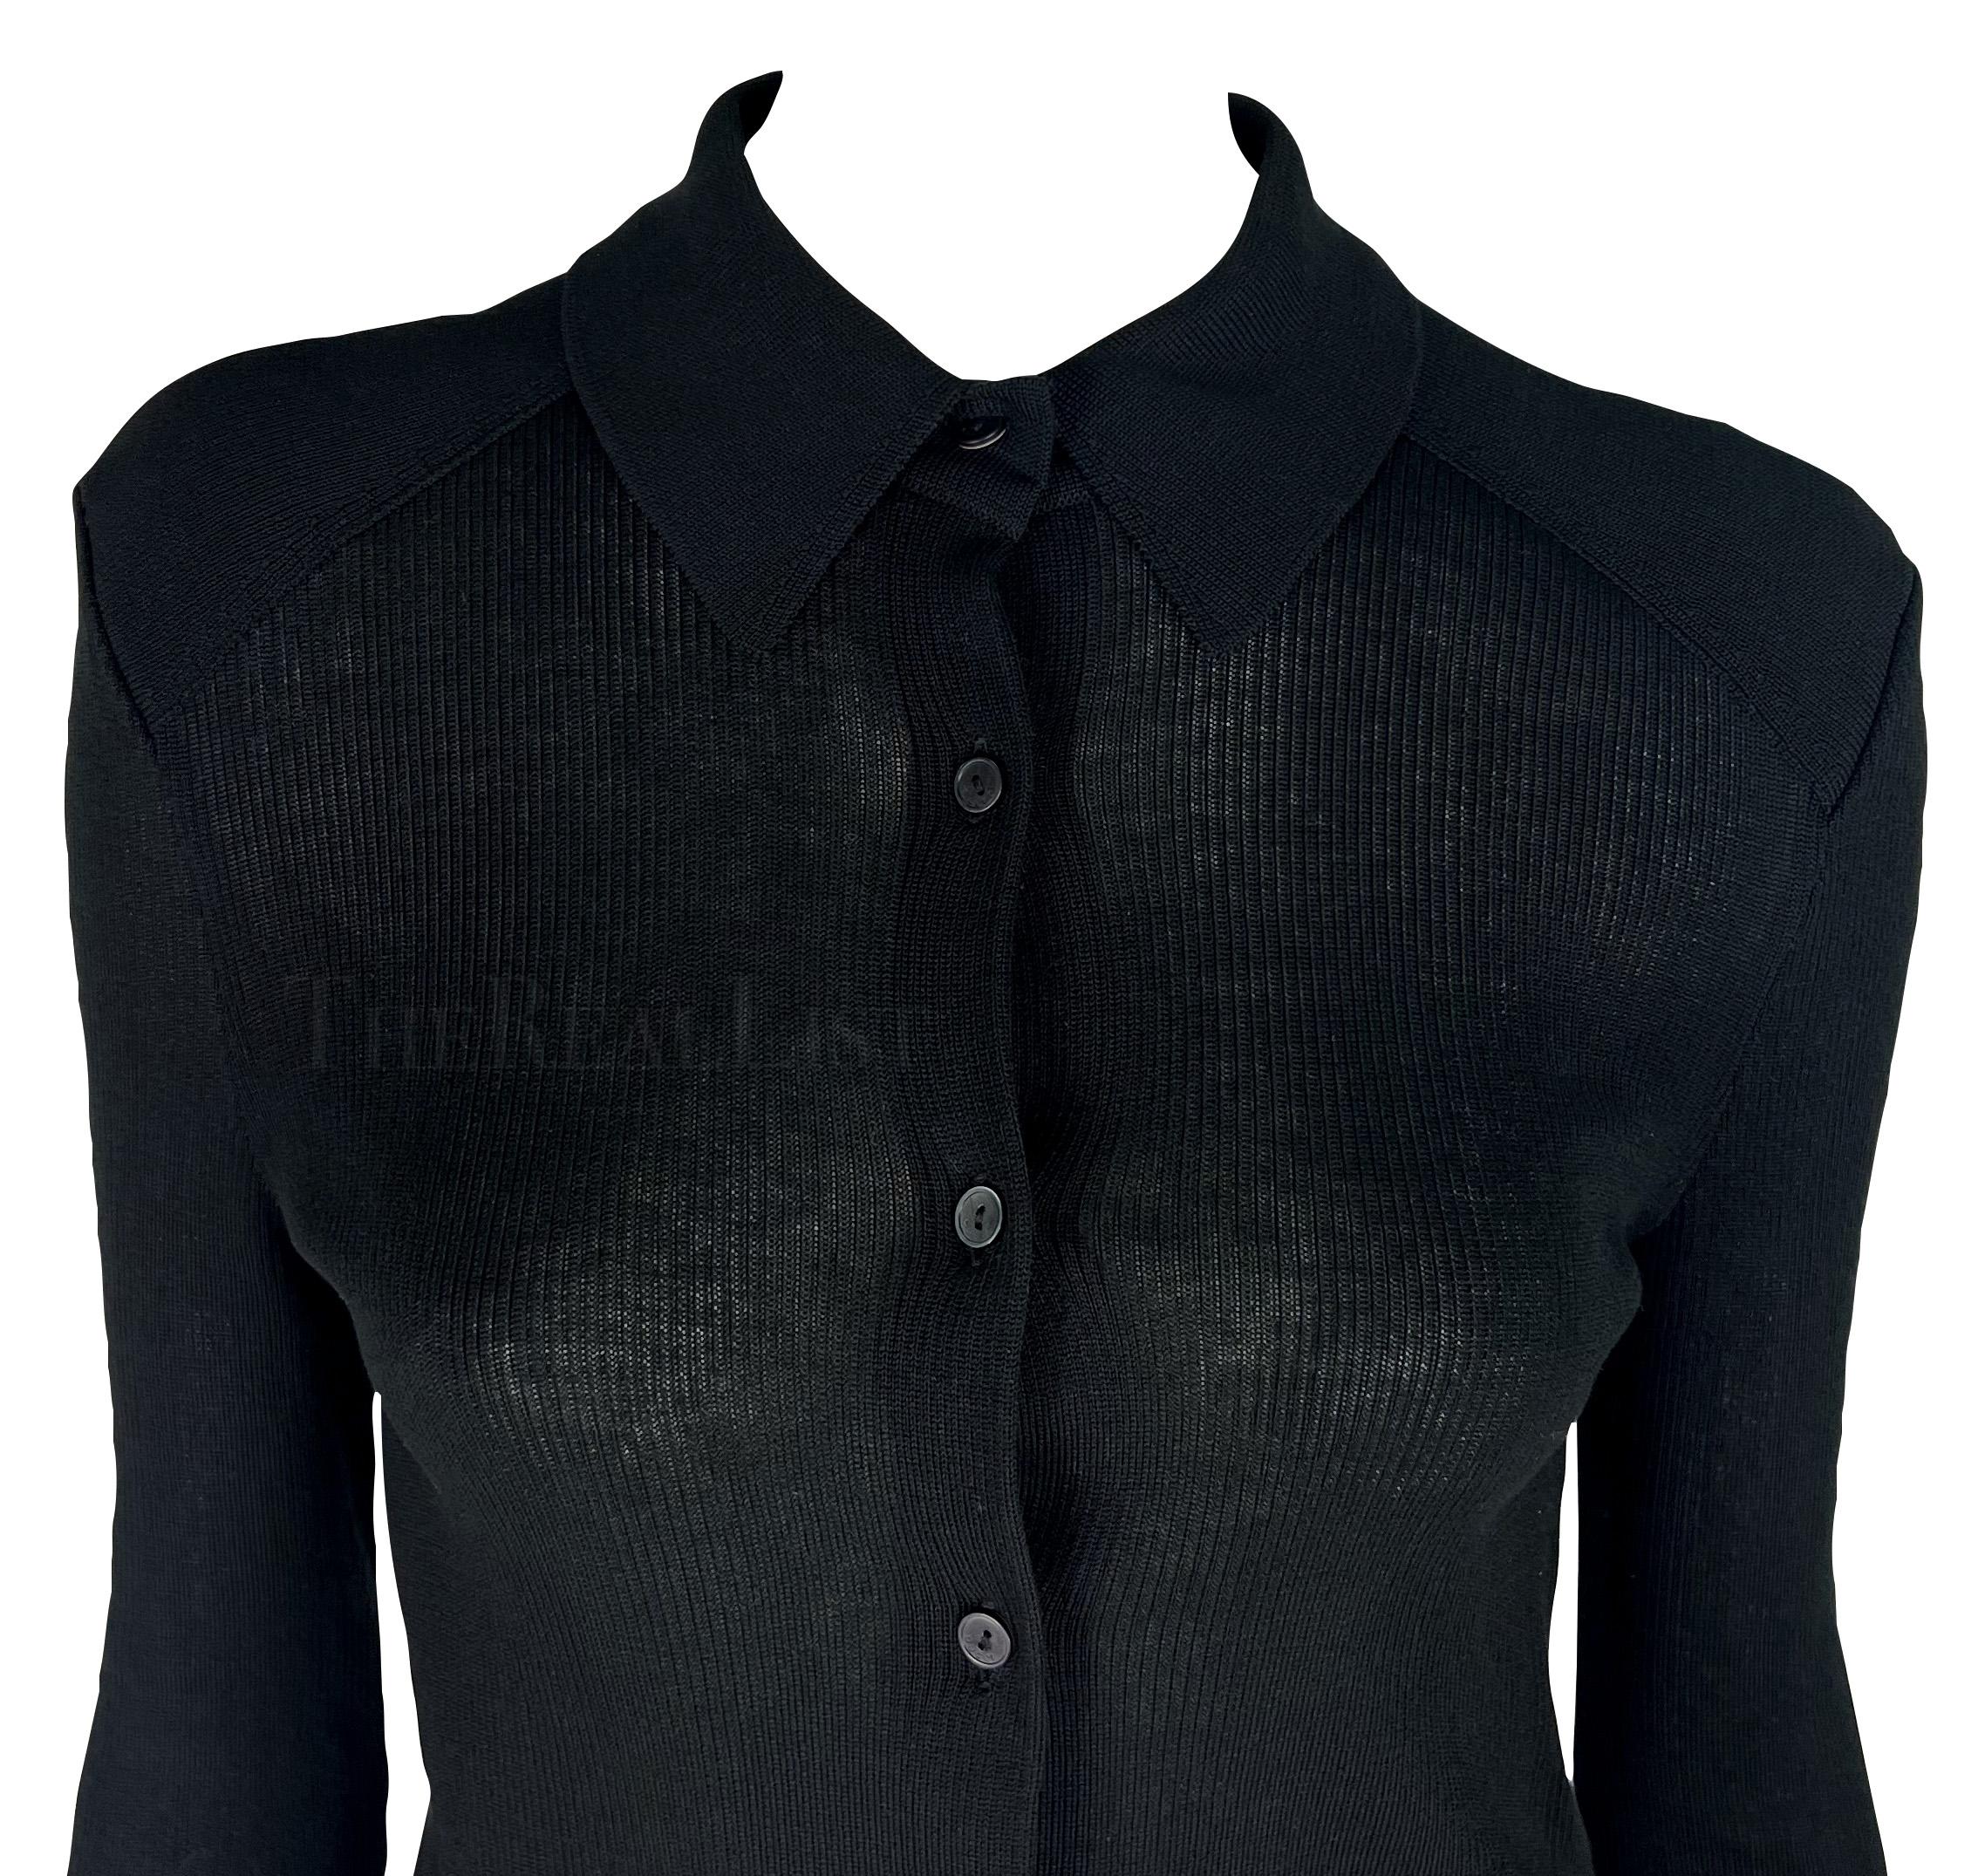 Presenting a fabulous black knit Gucci sweater, designed by Tom Ford. From 1998, this chic semi-sheer black cardigan sweater features a collar and is made complete with a button-down closure. Effortlessly chic, this Gucci by Tom Ford knit top is a